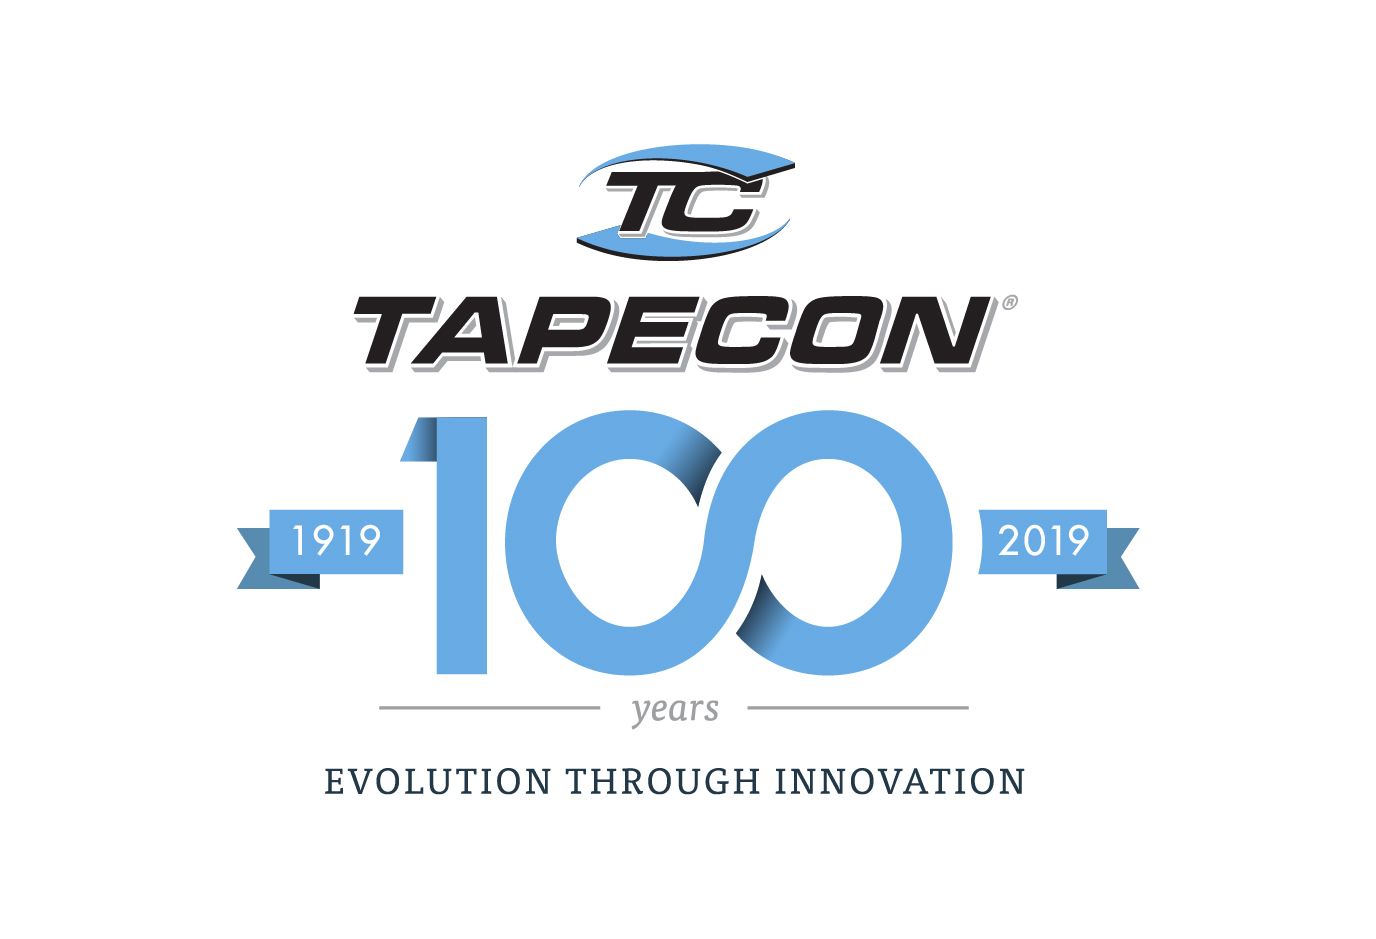 Tapecon Evolving Through Innovation for 100 Years